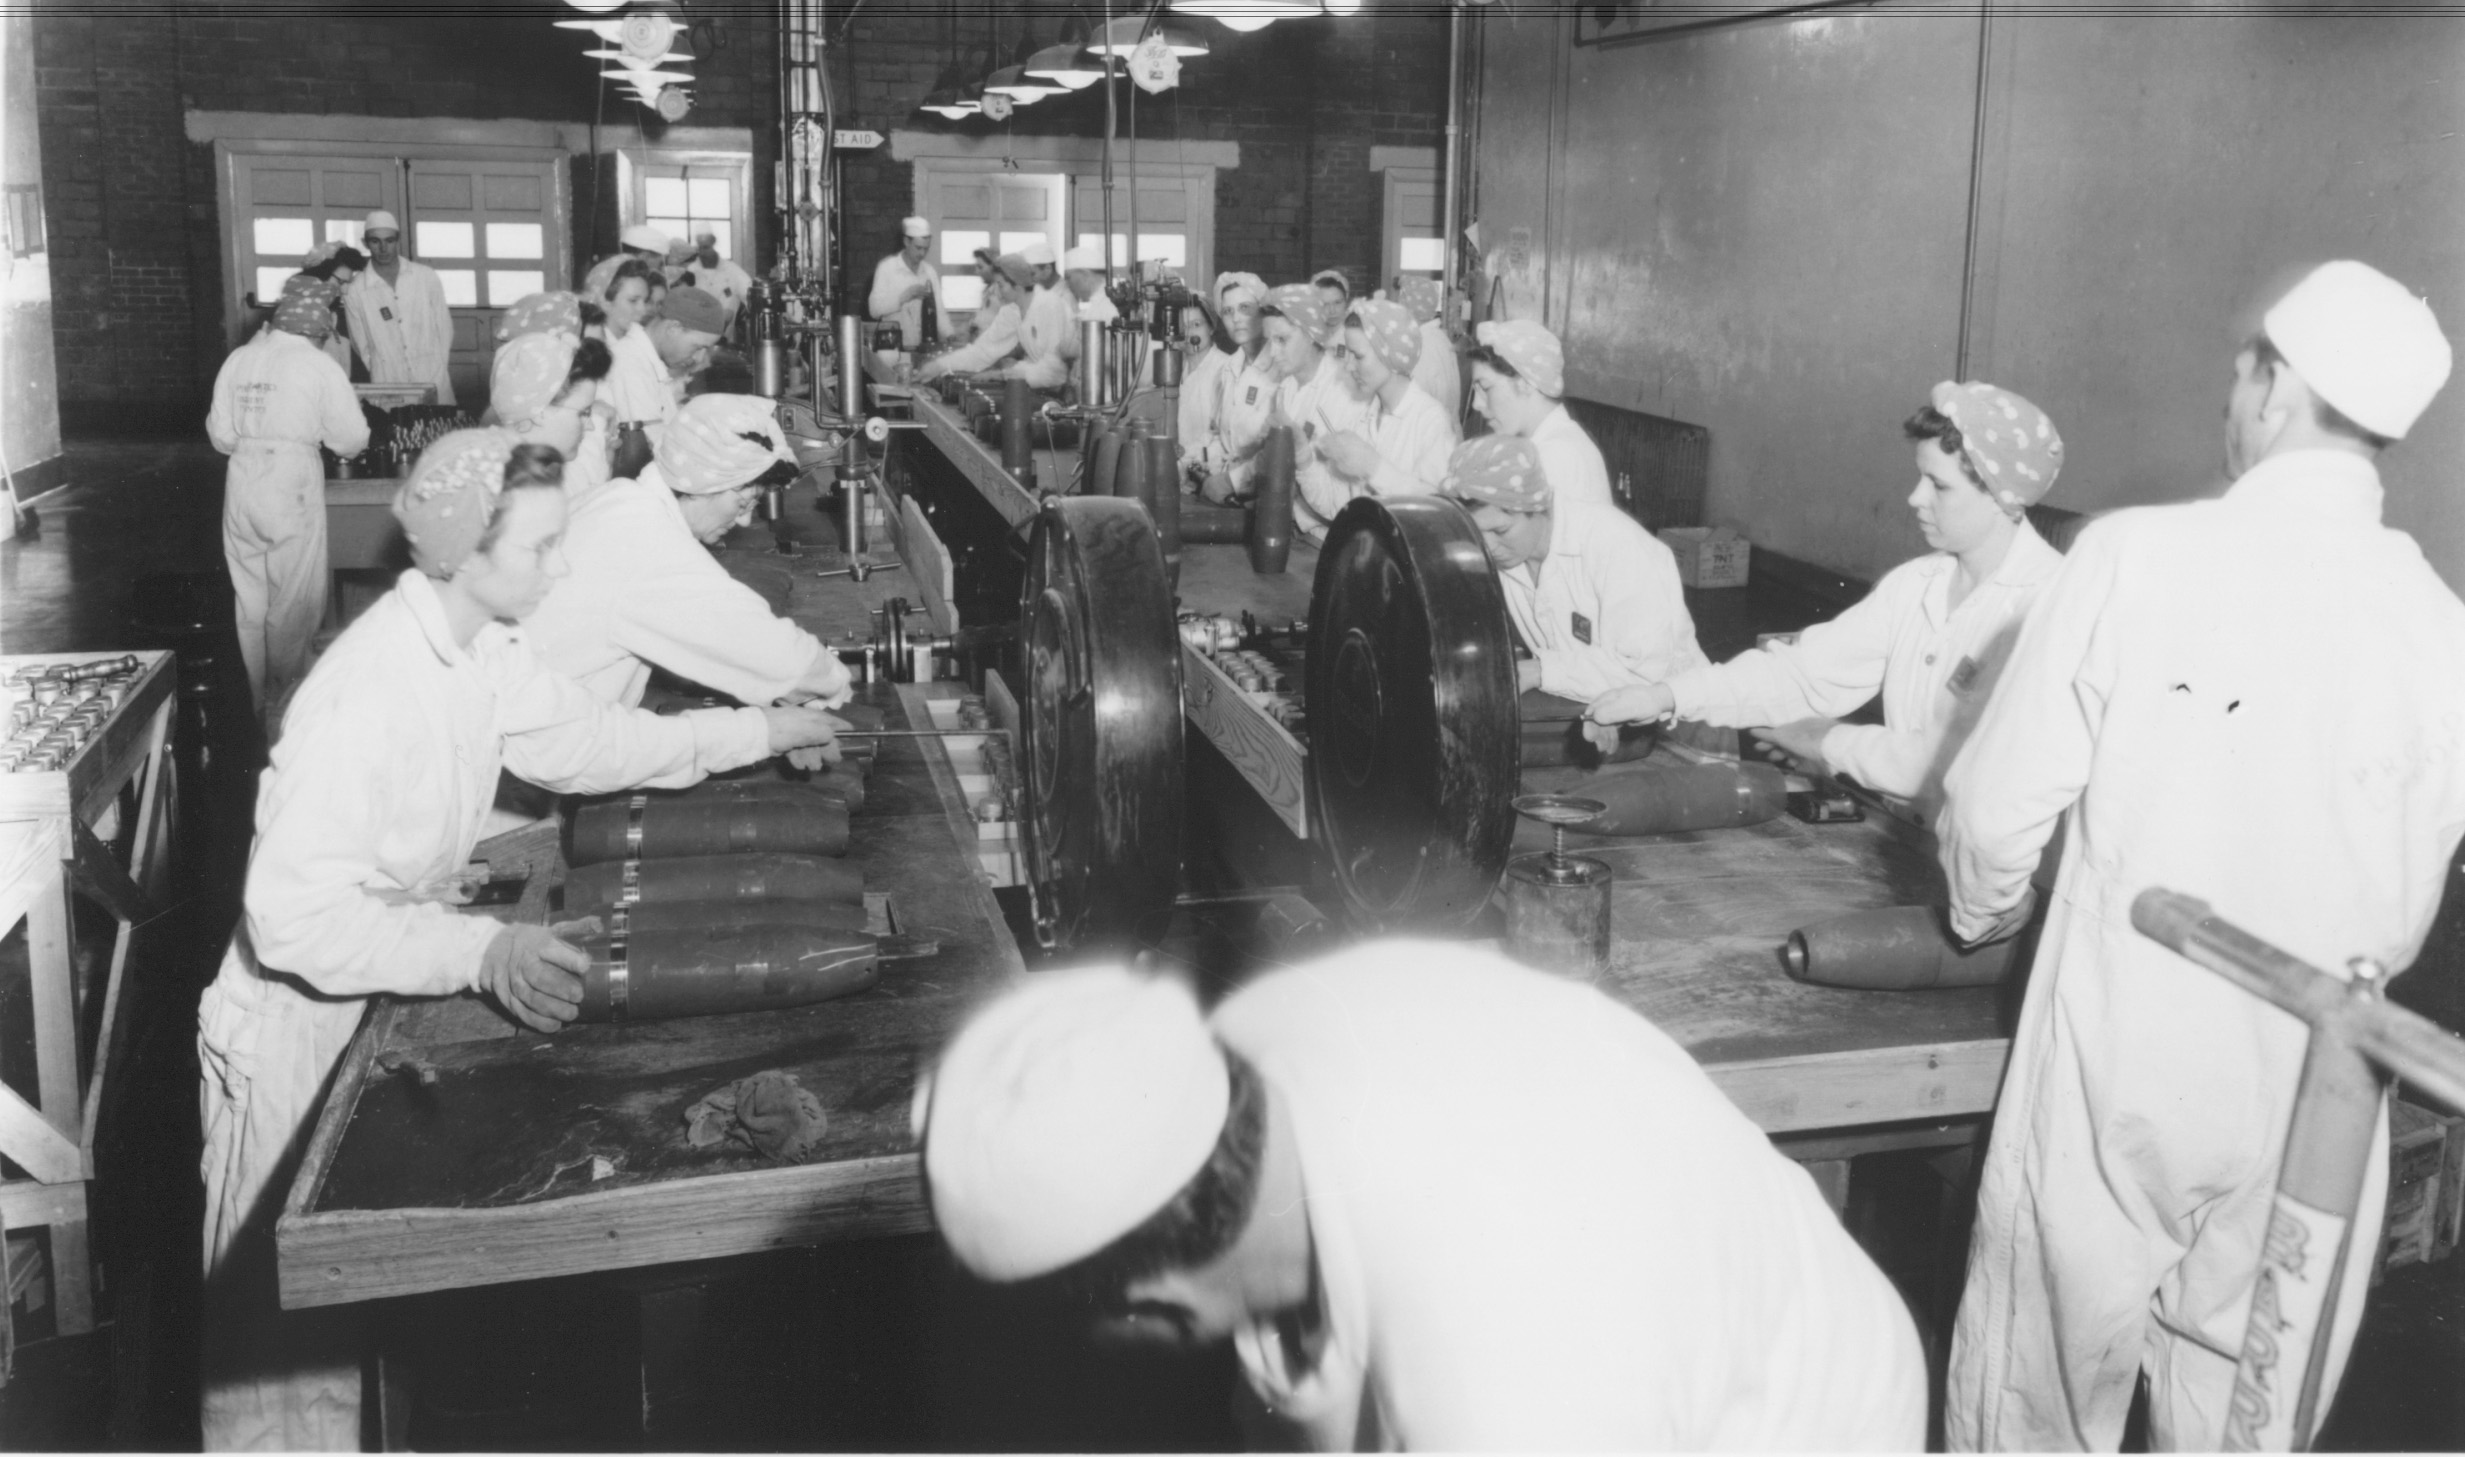 The Pantex Ordnance Plant began production September 17, 1942, and it was one of more than 70 such facilities in the United States. This year marks Pantex’s 80th anniversary.